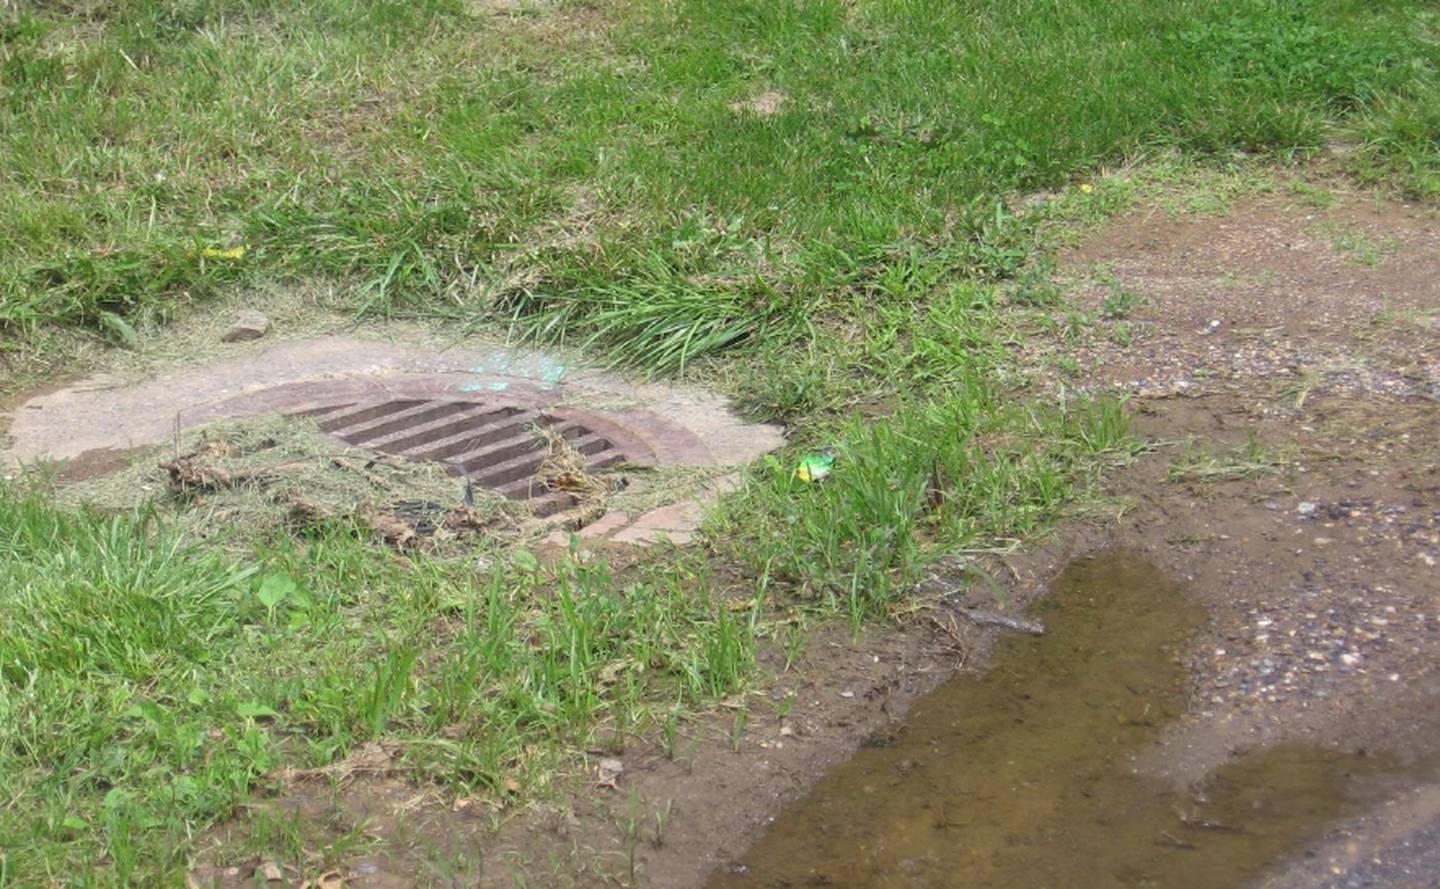 This open stormwater inlet was near where an estimated 2,000 to 3,000 gallons of unsterilized lab wastewater sprayed from an outdoor storage tank at Fort Detrick.